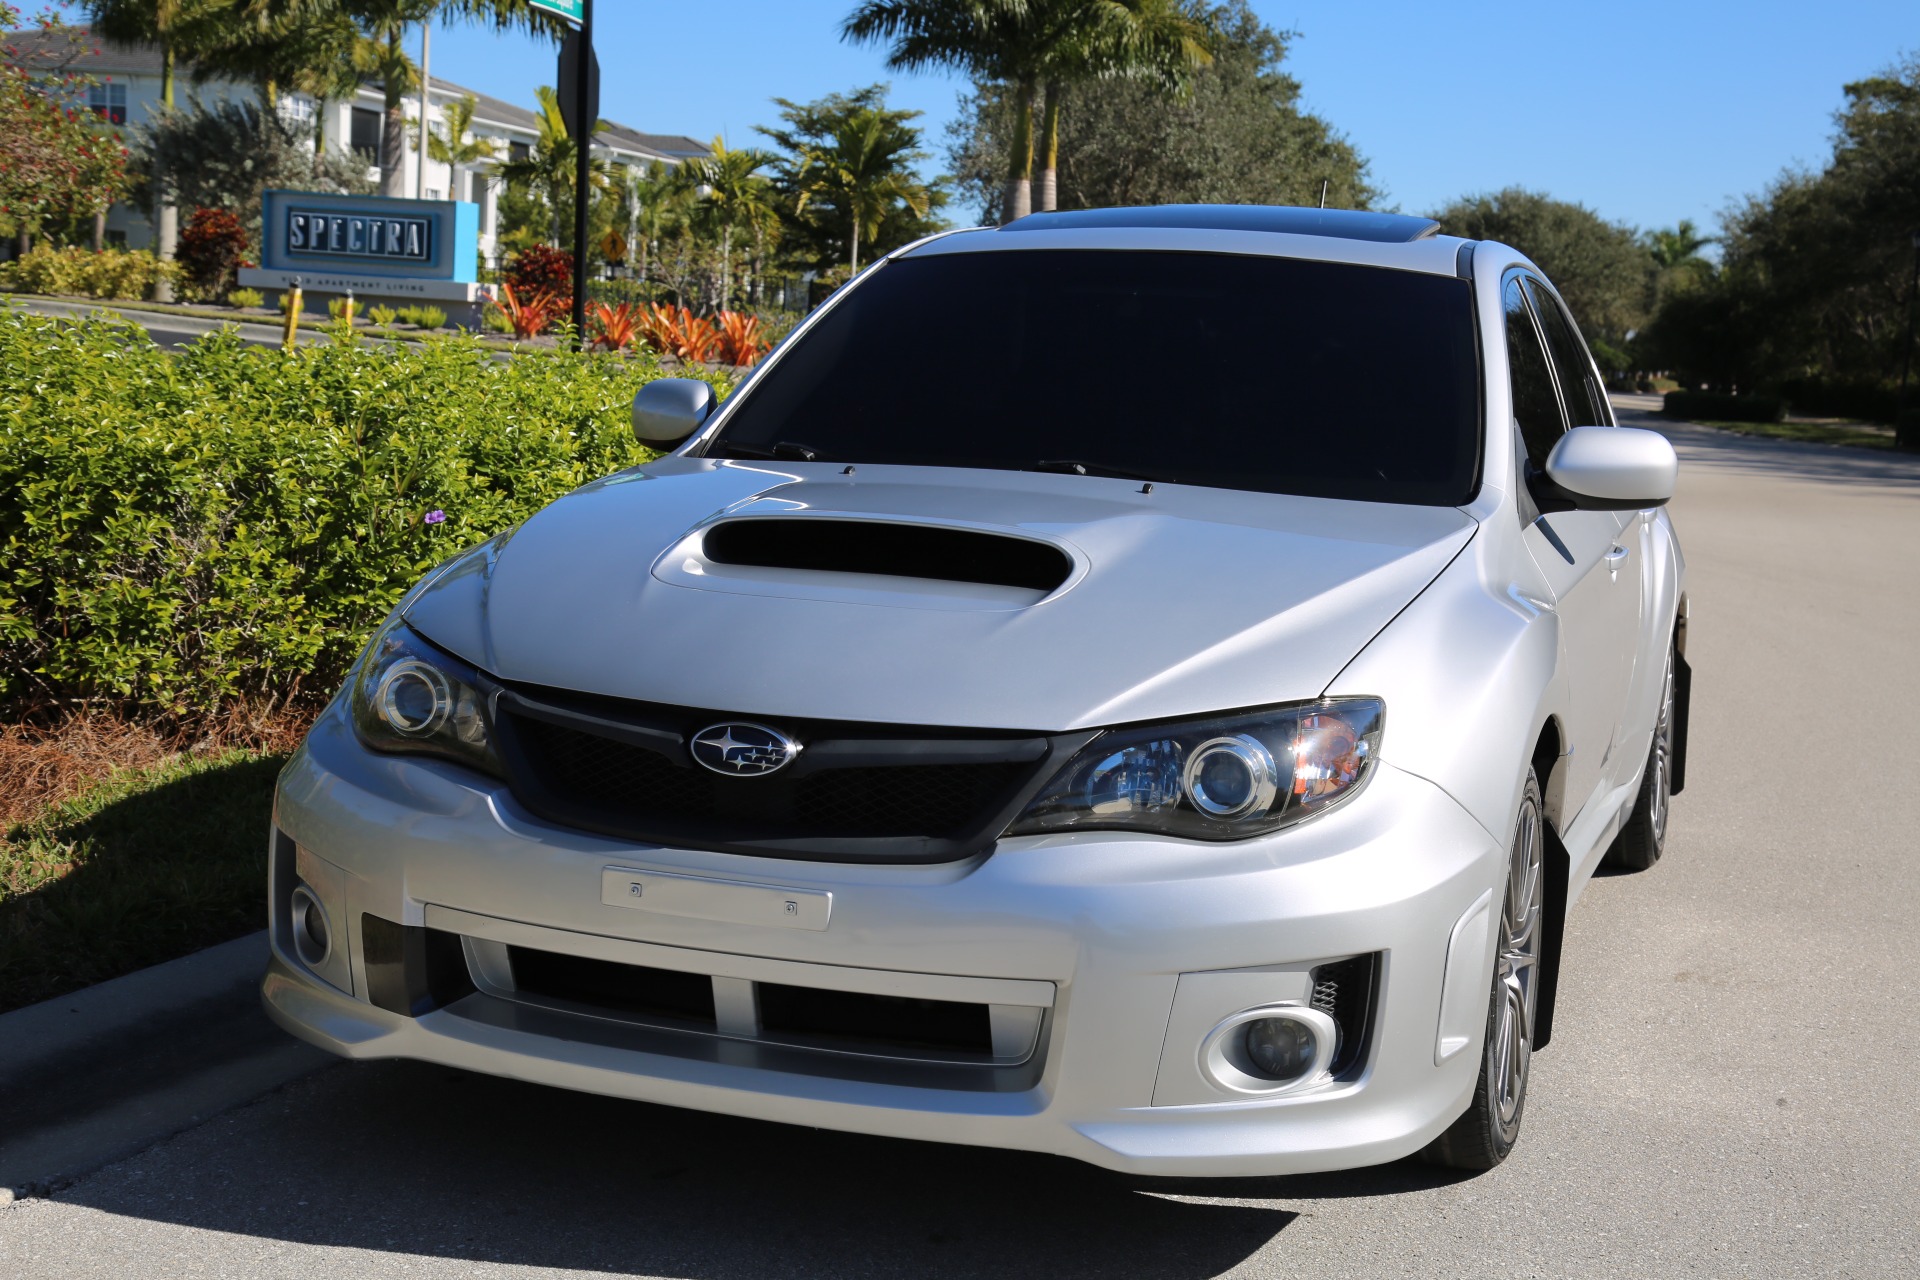 Used 2011 Subaru Impreza WRX Premium for sale Sold at Muscle Cars for Sale Inc. in Fort Myers FL 33912 3